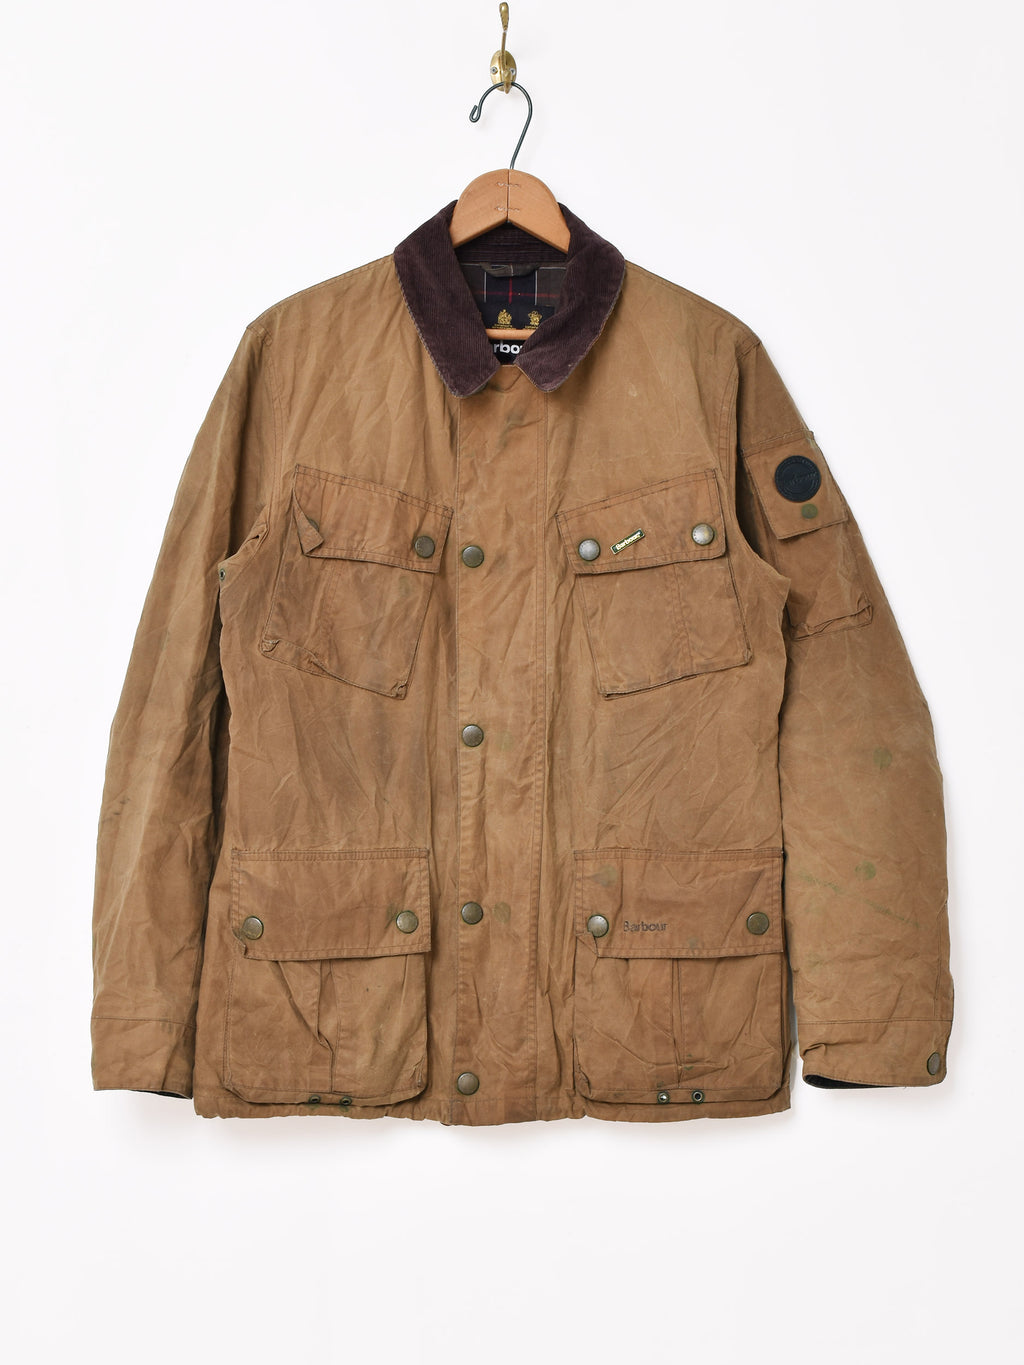 Barbour コーデュロイ襟 オイルドジャケット – 古着屋Top of the Hill